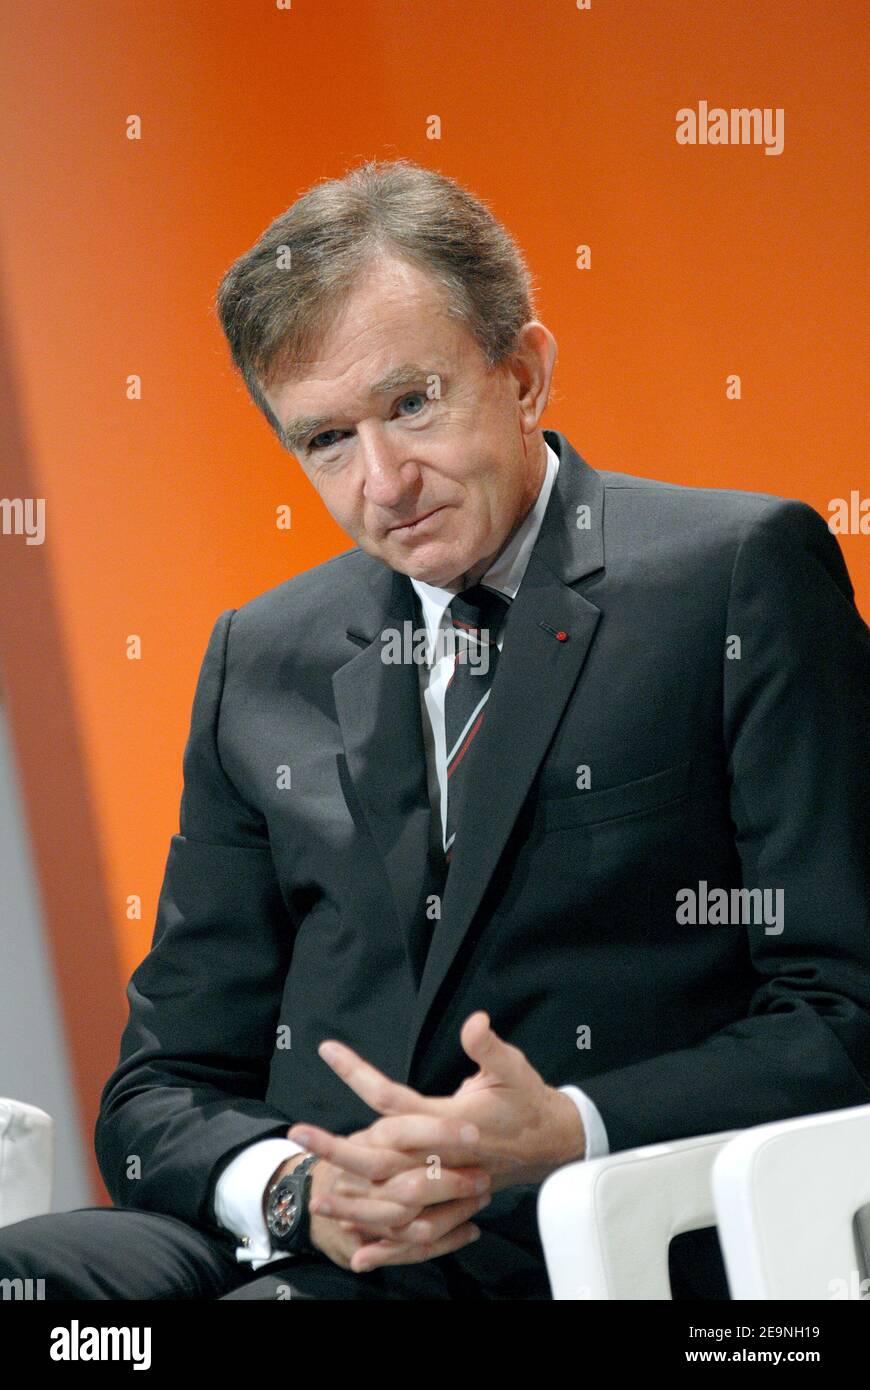 LVMH's CEO Bernard Arnault announces the creation of a cultural foundation  'Louis Vuitton Pour la Creation' during a Press Conference in Paris,  France, on October 2, 2006. U.S. architect Frank Gehry will